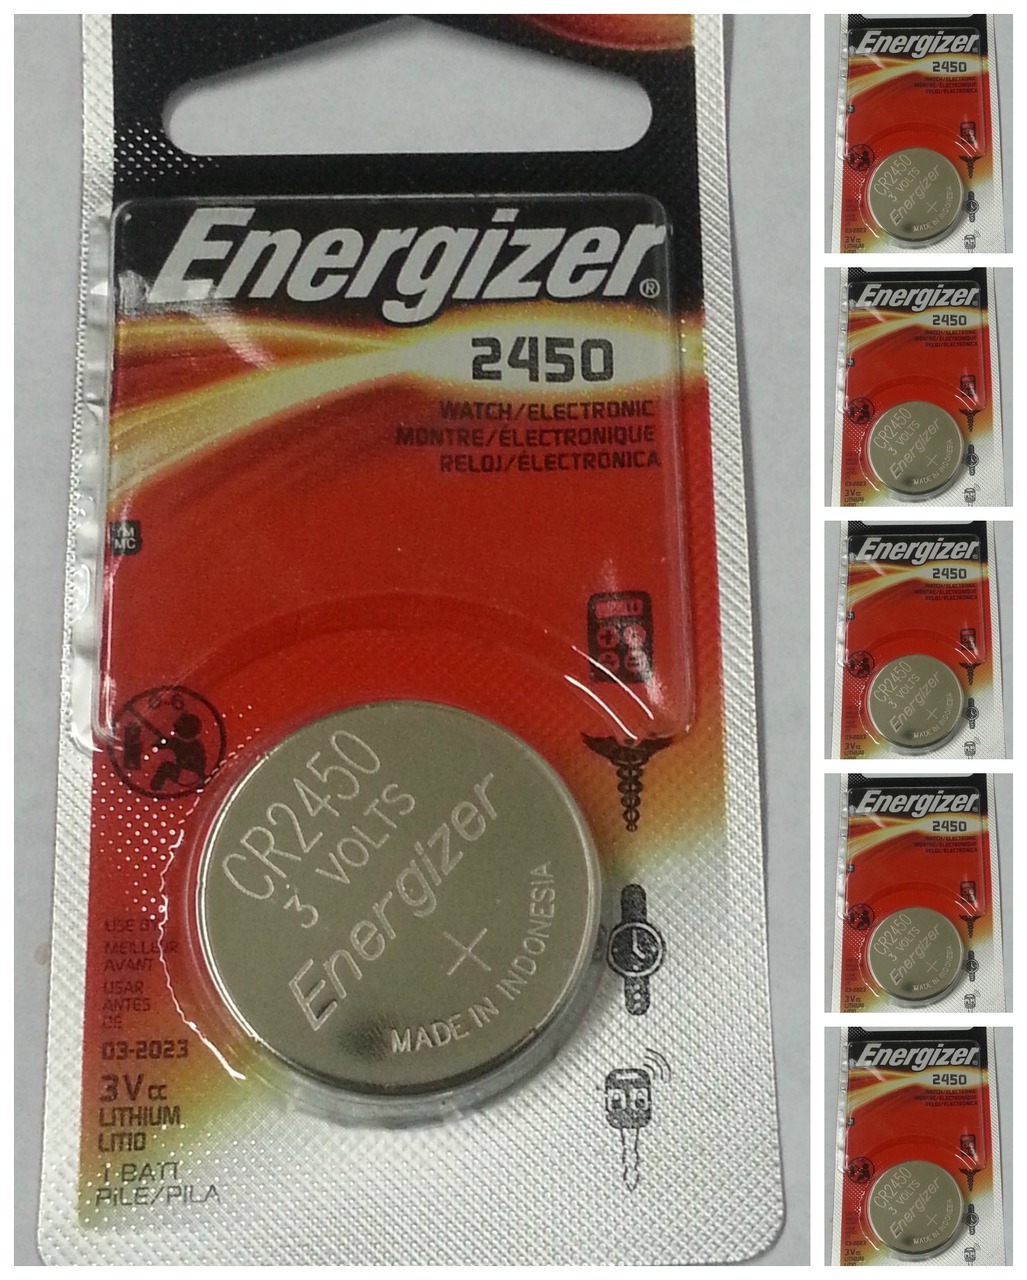 Energizer CR2450 3V Lithium Coin Battery 6 Pack + FREE SHIPPING